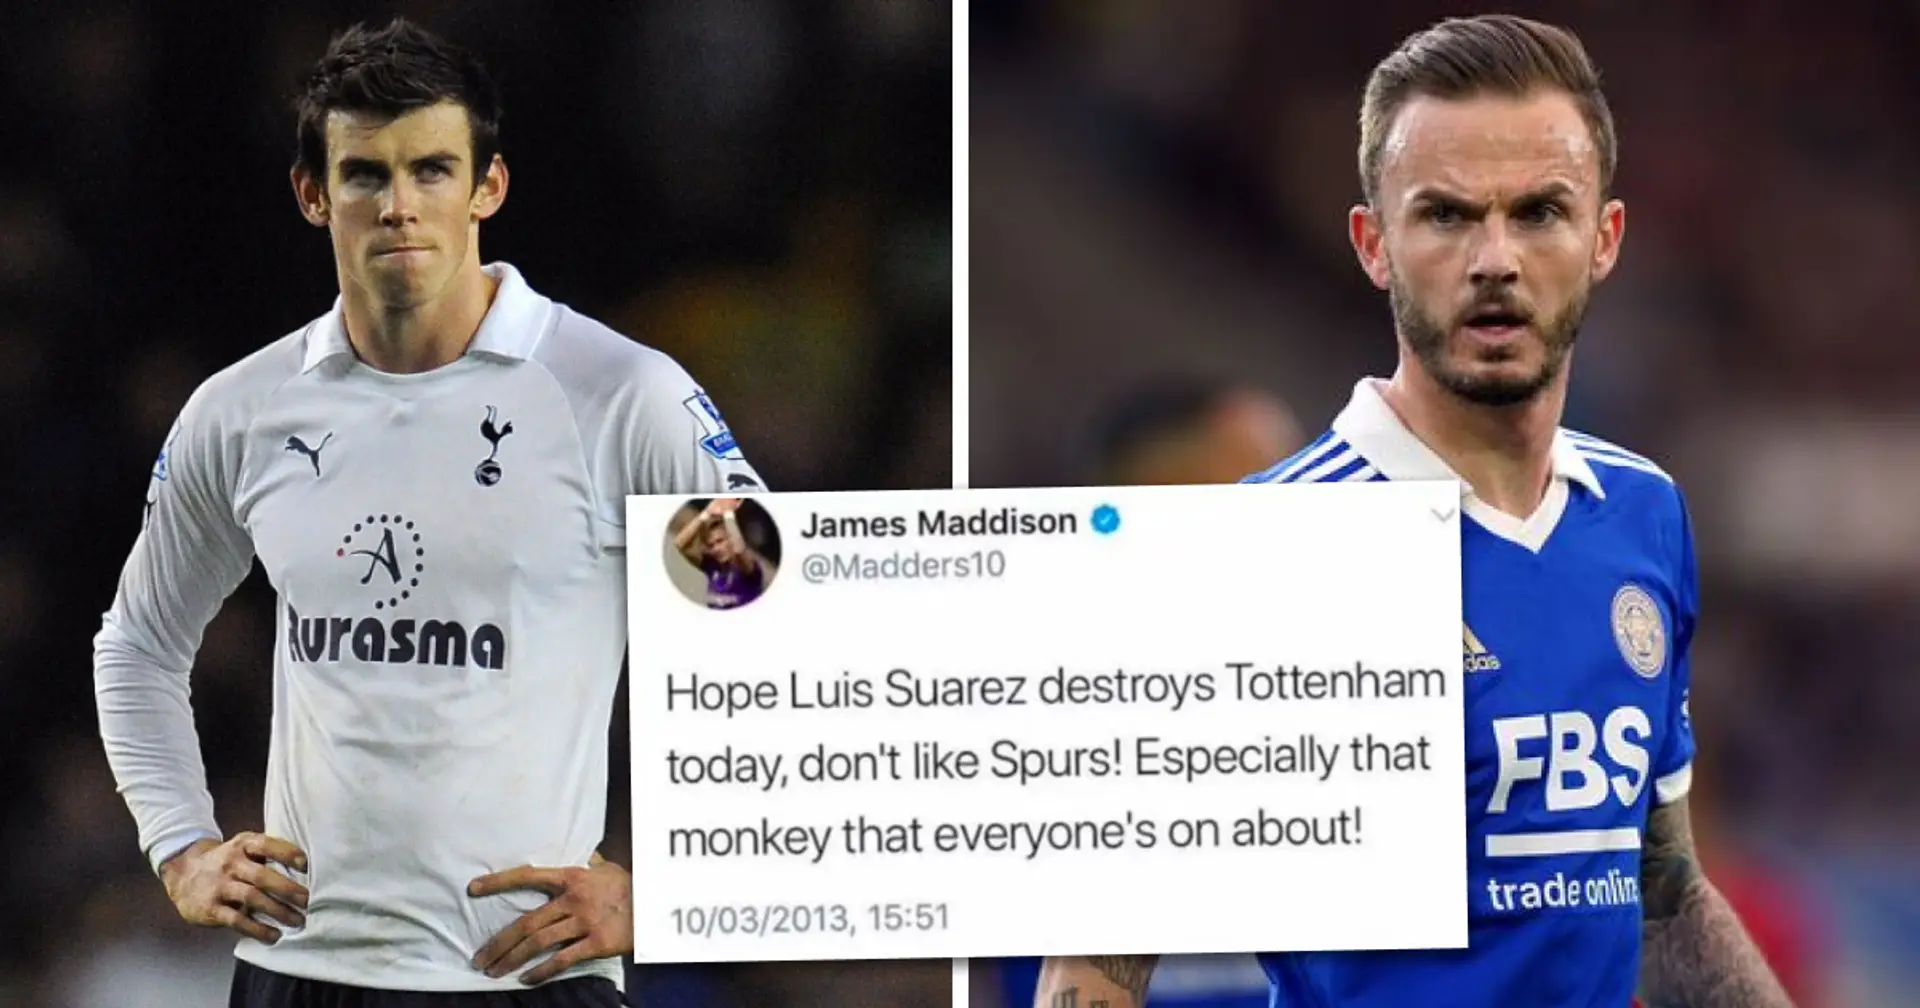 James Maddison deletes his old hate tweets about Bale and Spurs ahead of his move to Tottenham